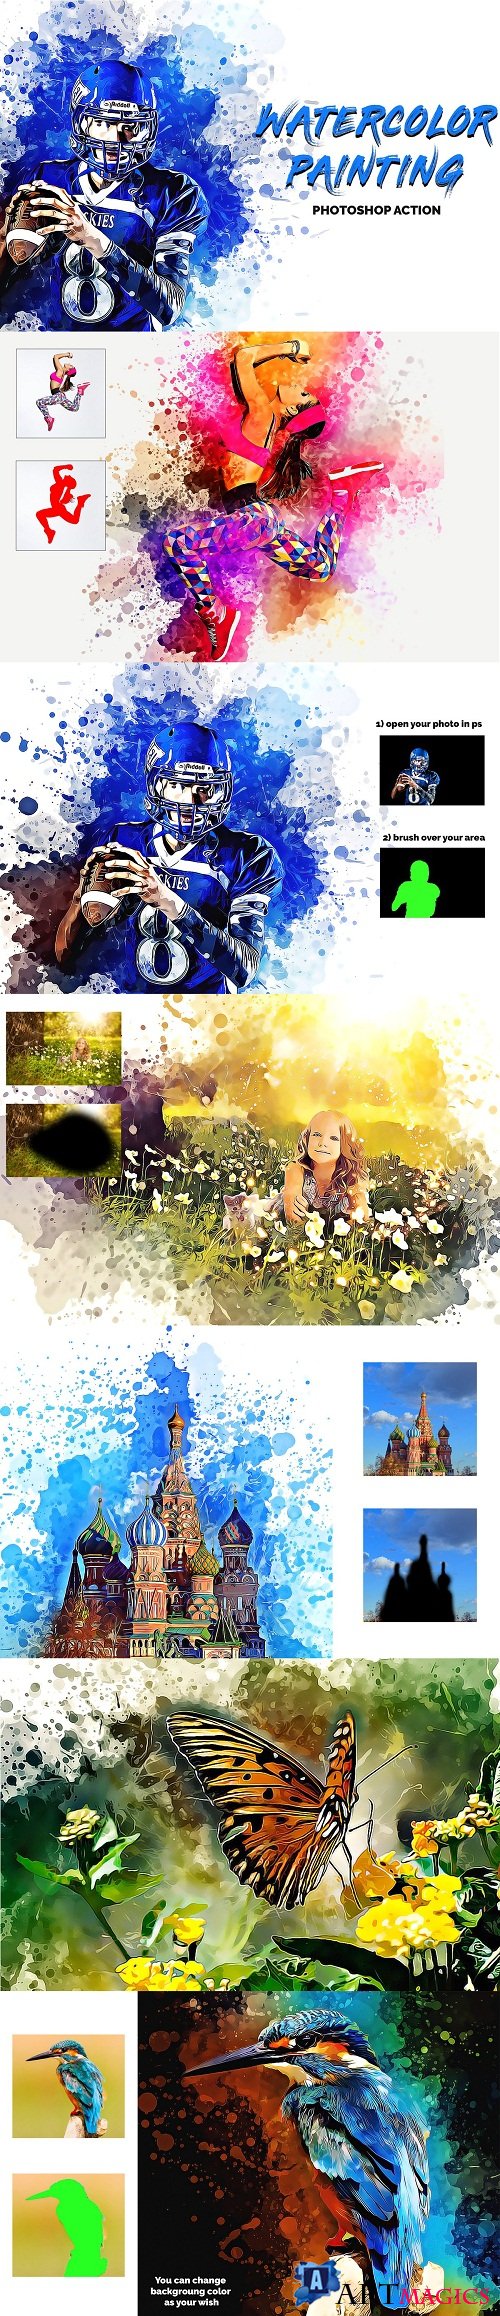 Watercolor Painting Photoshop Action 3365167